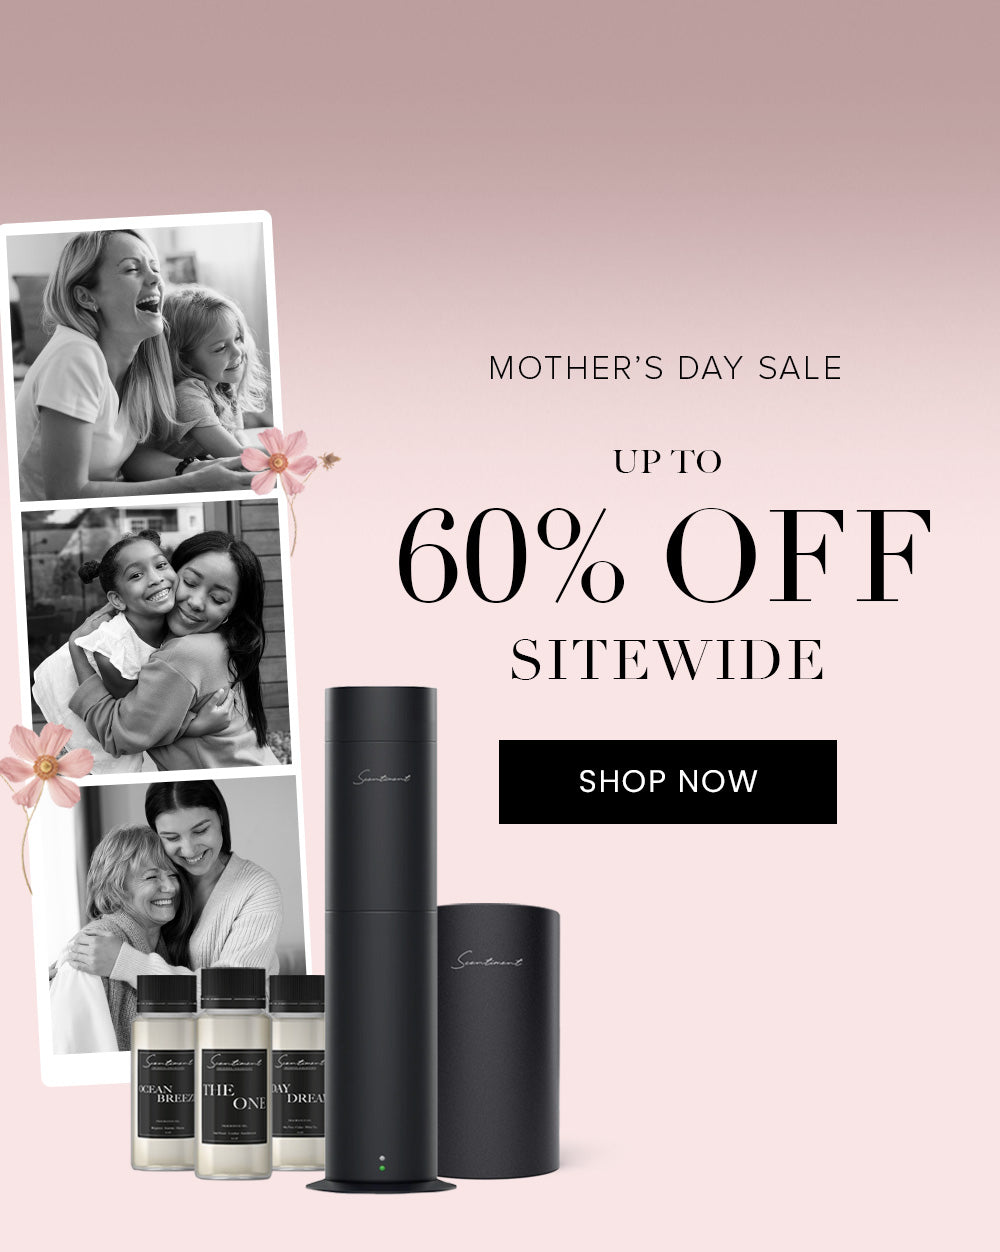 Mother's Day Sale: Up to 60% OFF Sitewide! Shop Now